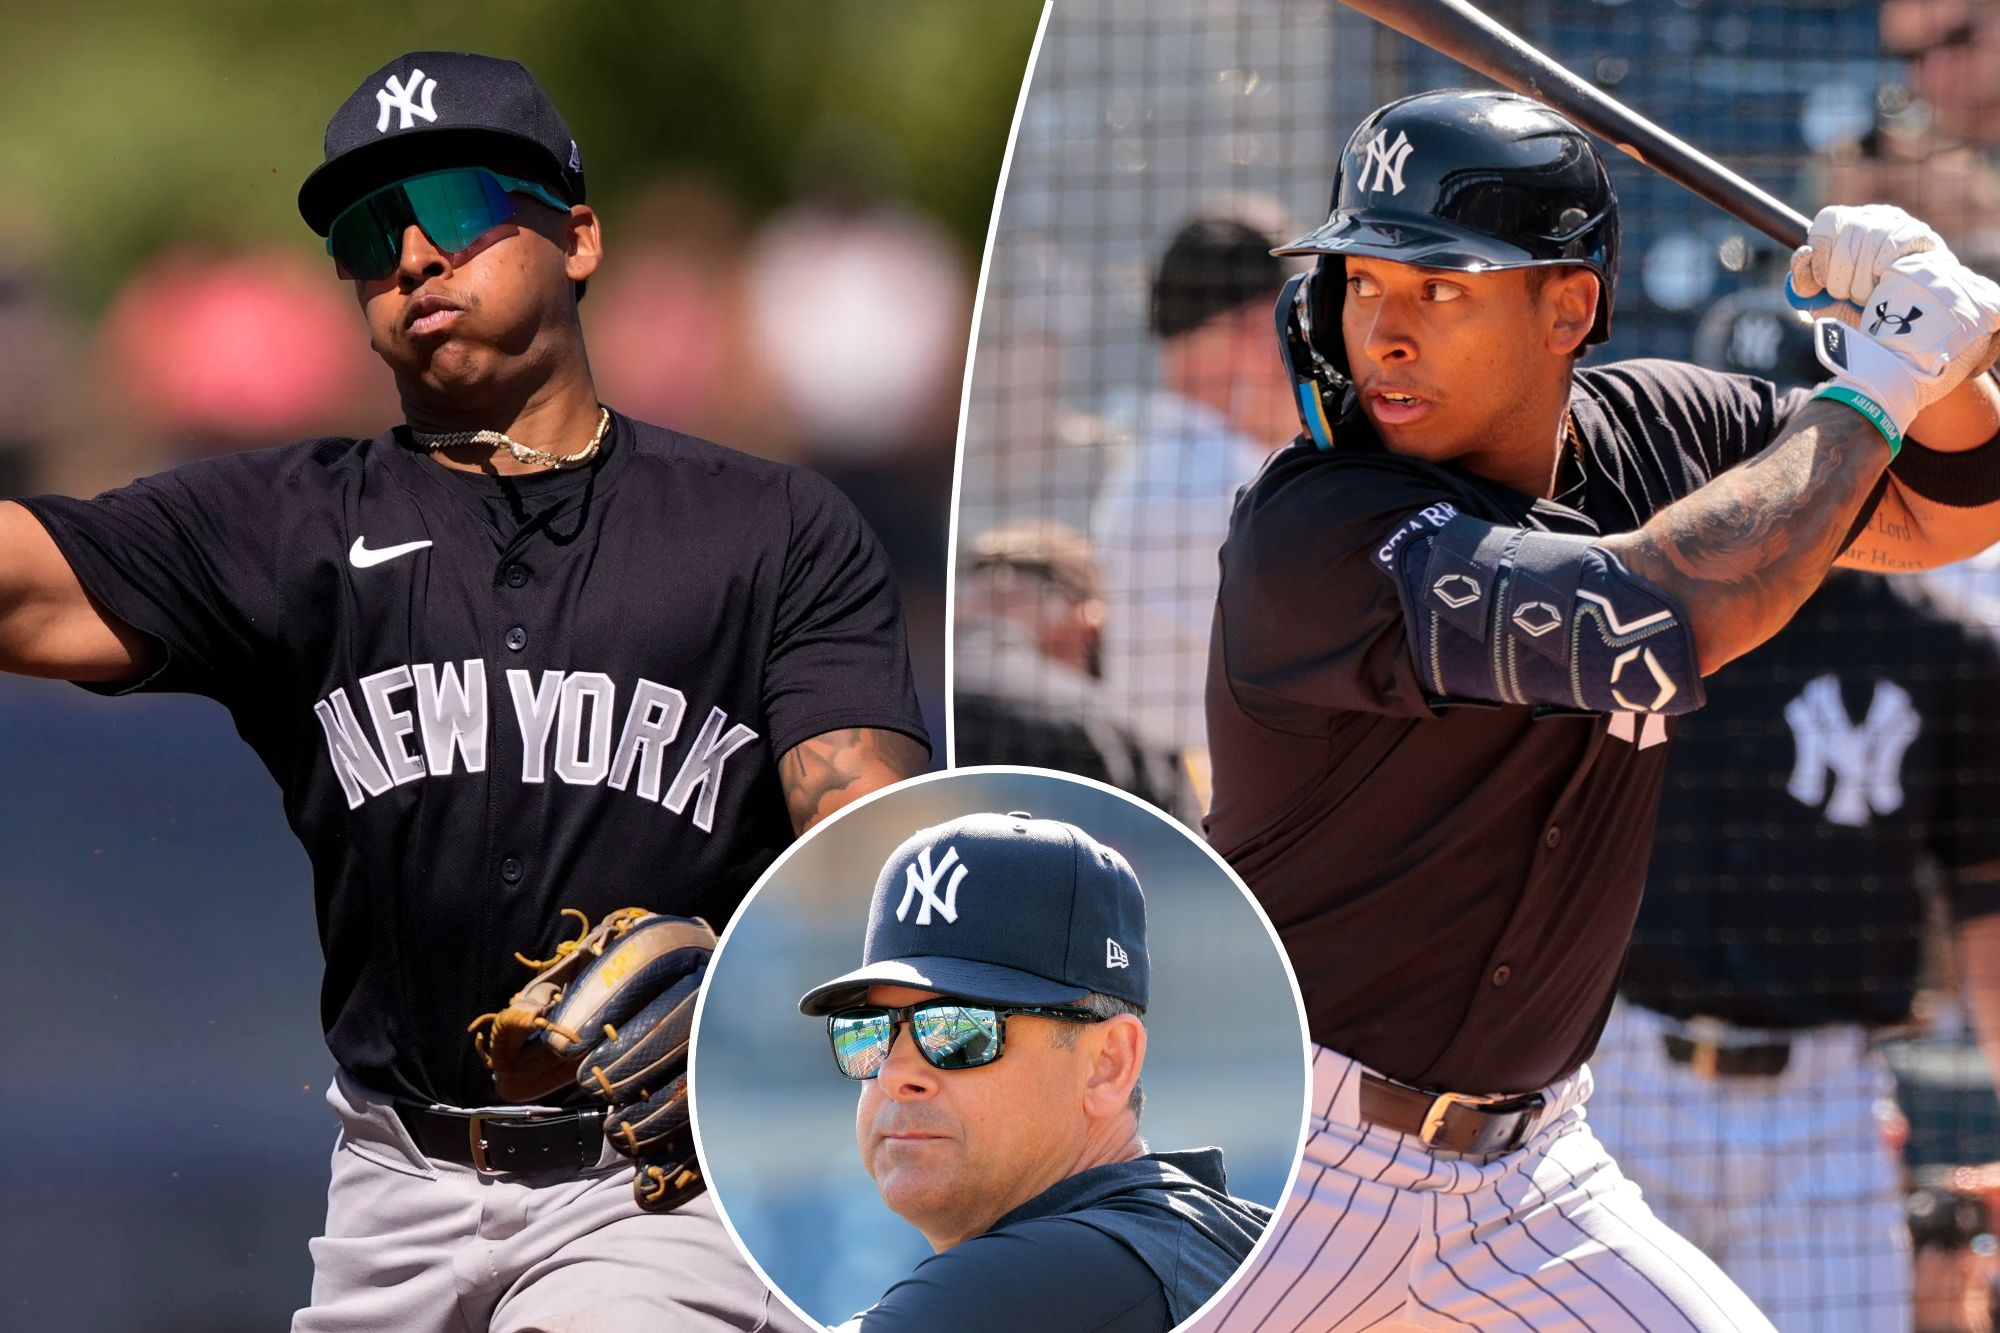 Jorbit Vivas in the field and at the plate for the Yankees in spring training; Aaron Boone